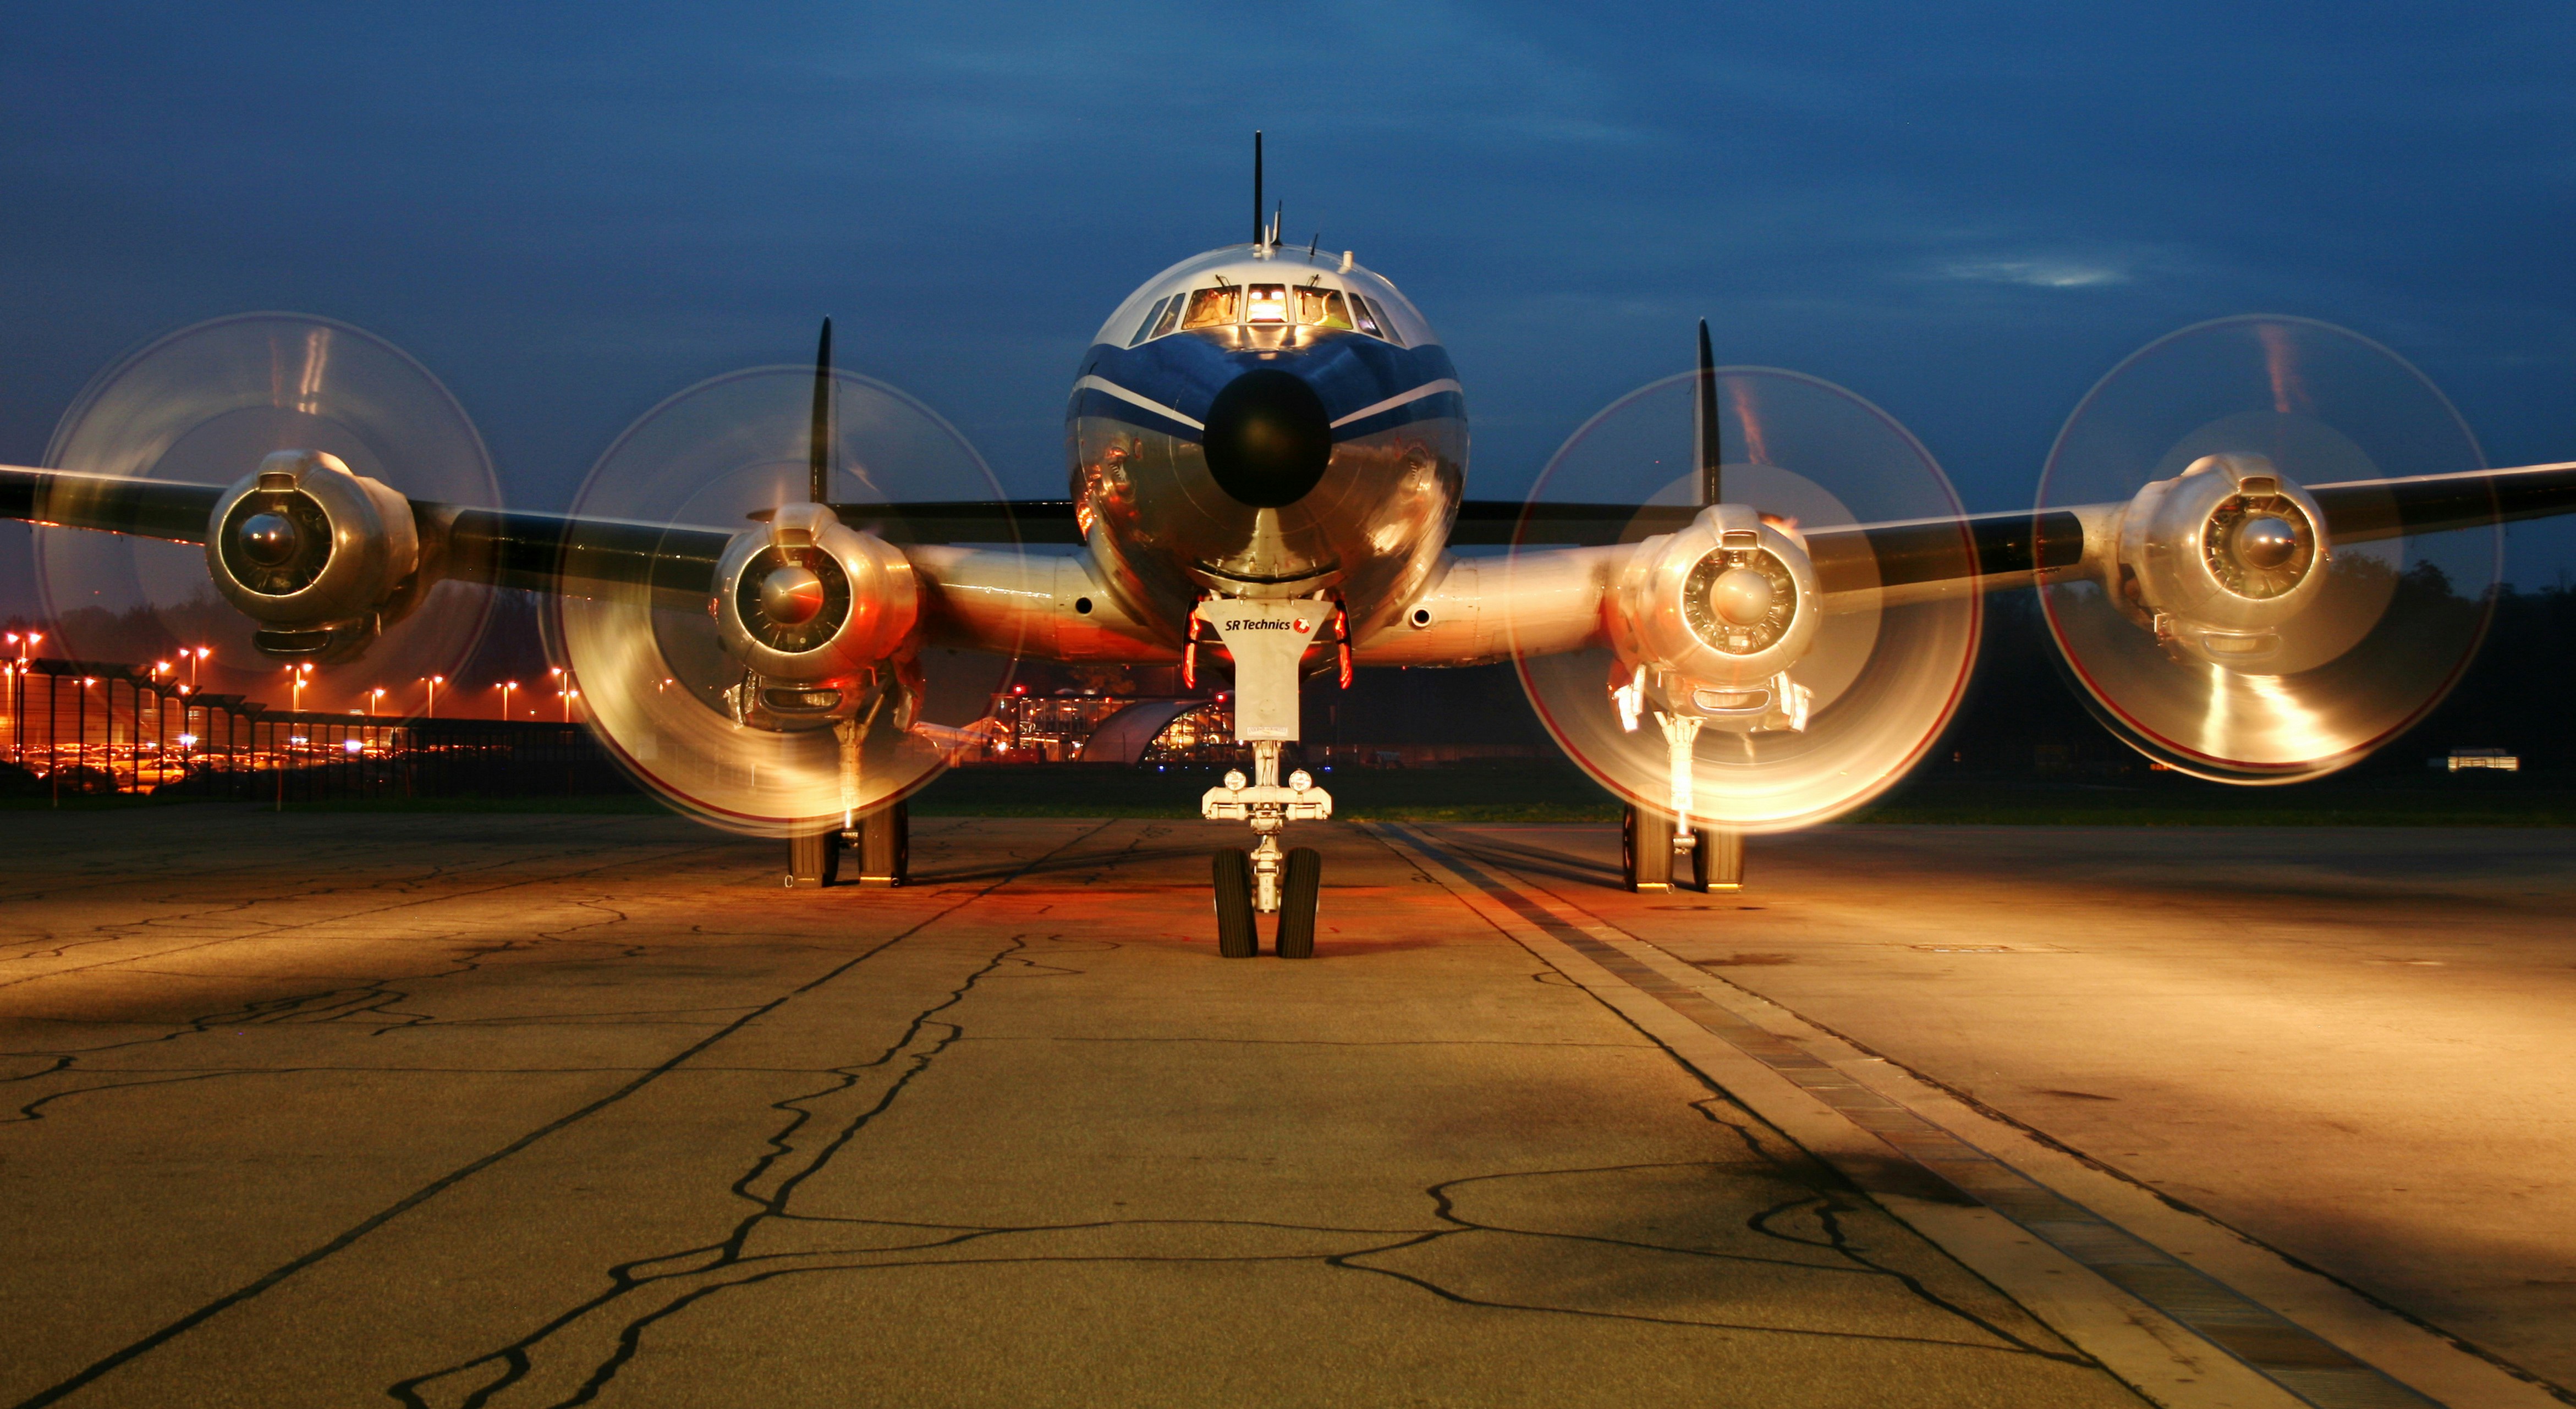 Especially for this photograph we postponed the monthly engine test to the end of the day.
We used three “follow me cars” to light up the propellers of this iconic aircraft. After the crash of a Junkers JU-52 aircraft in the Alps, the Civil Aviation Authority requested repairs and modifications of the Connie that would cost around CHF 20 Million. The Owners decided to sell the Connie to Germany. It will be taken to Bremgarten, Germany in the next few weeks. The new owner plans to repair the plane to former glory and take the skies again.